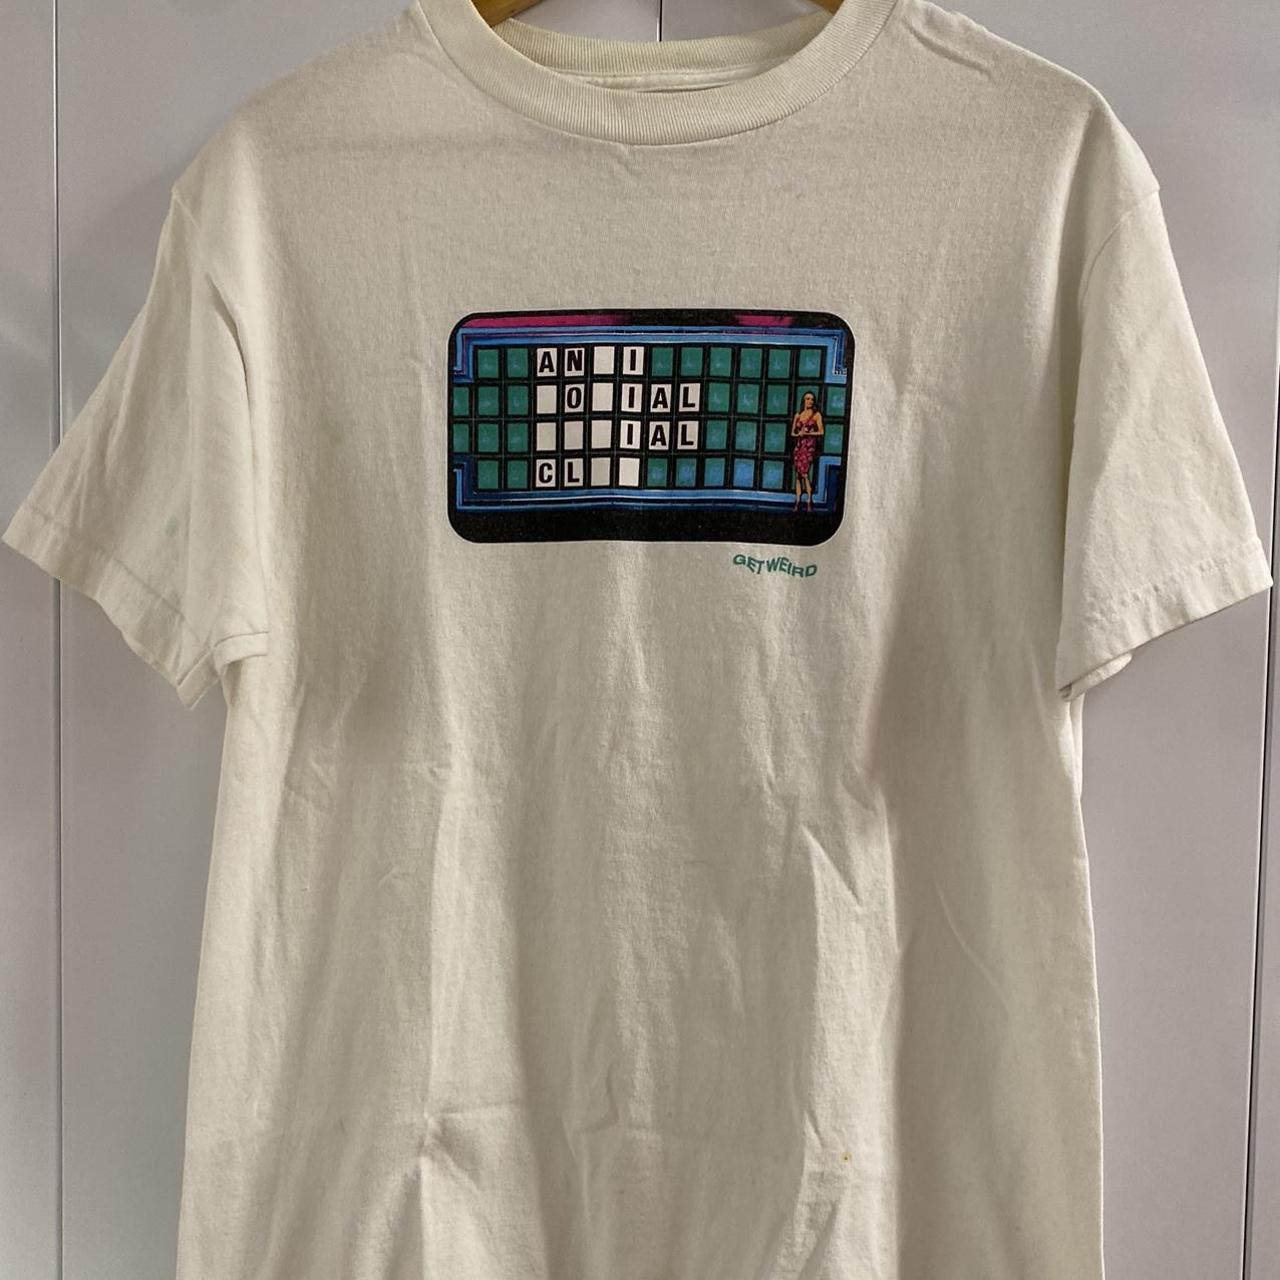 Urban Outfitters Men's T-shirt